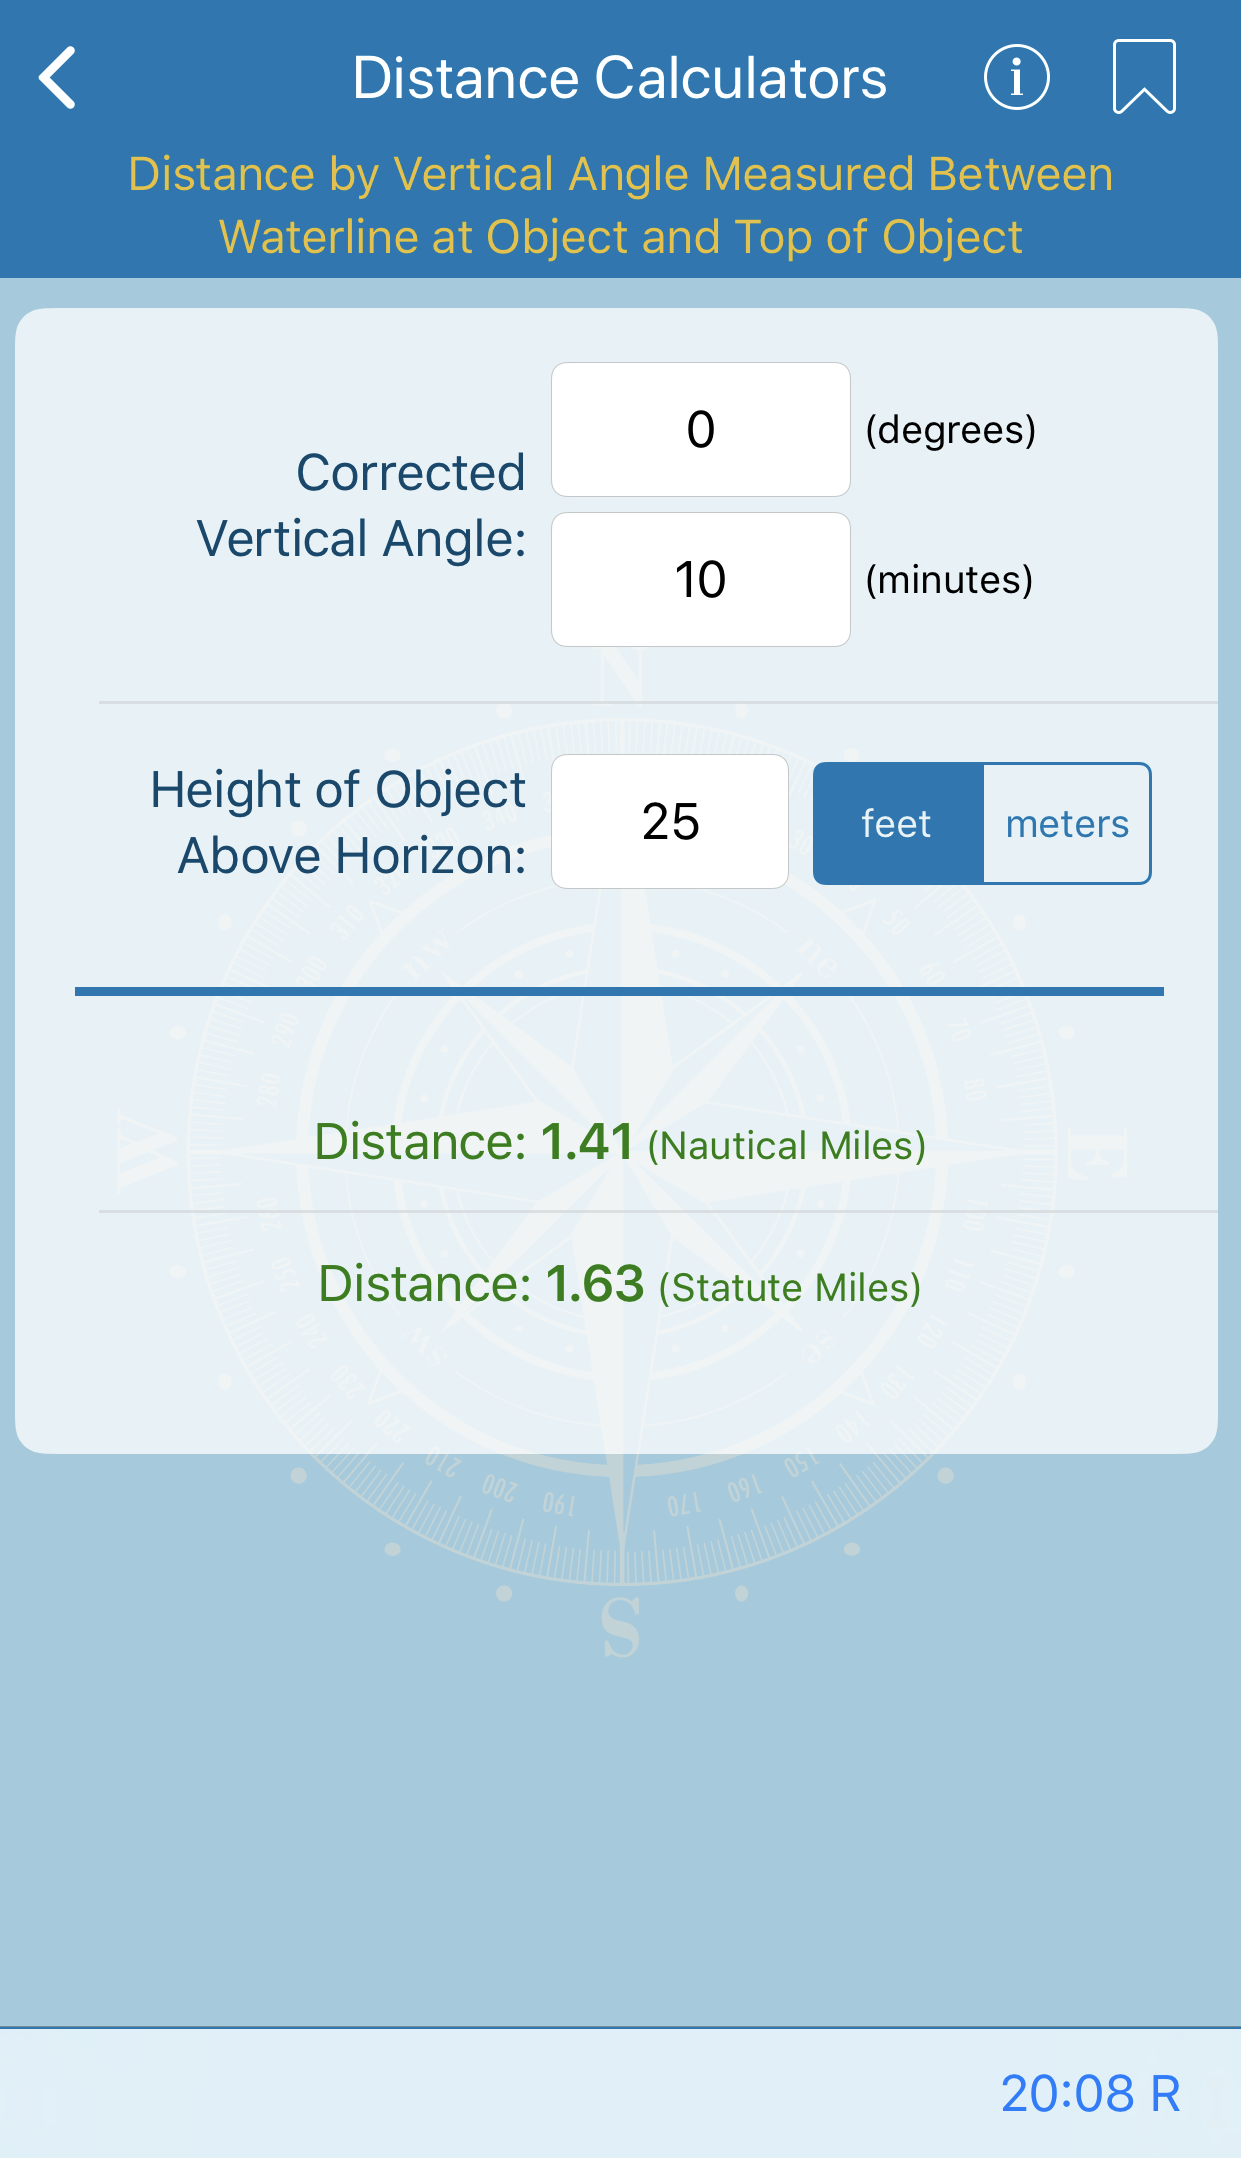 Distance by Vertical Angle Measured Between Waterline at Object and Top of Object